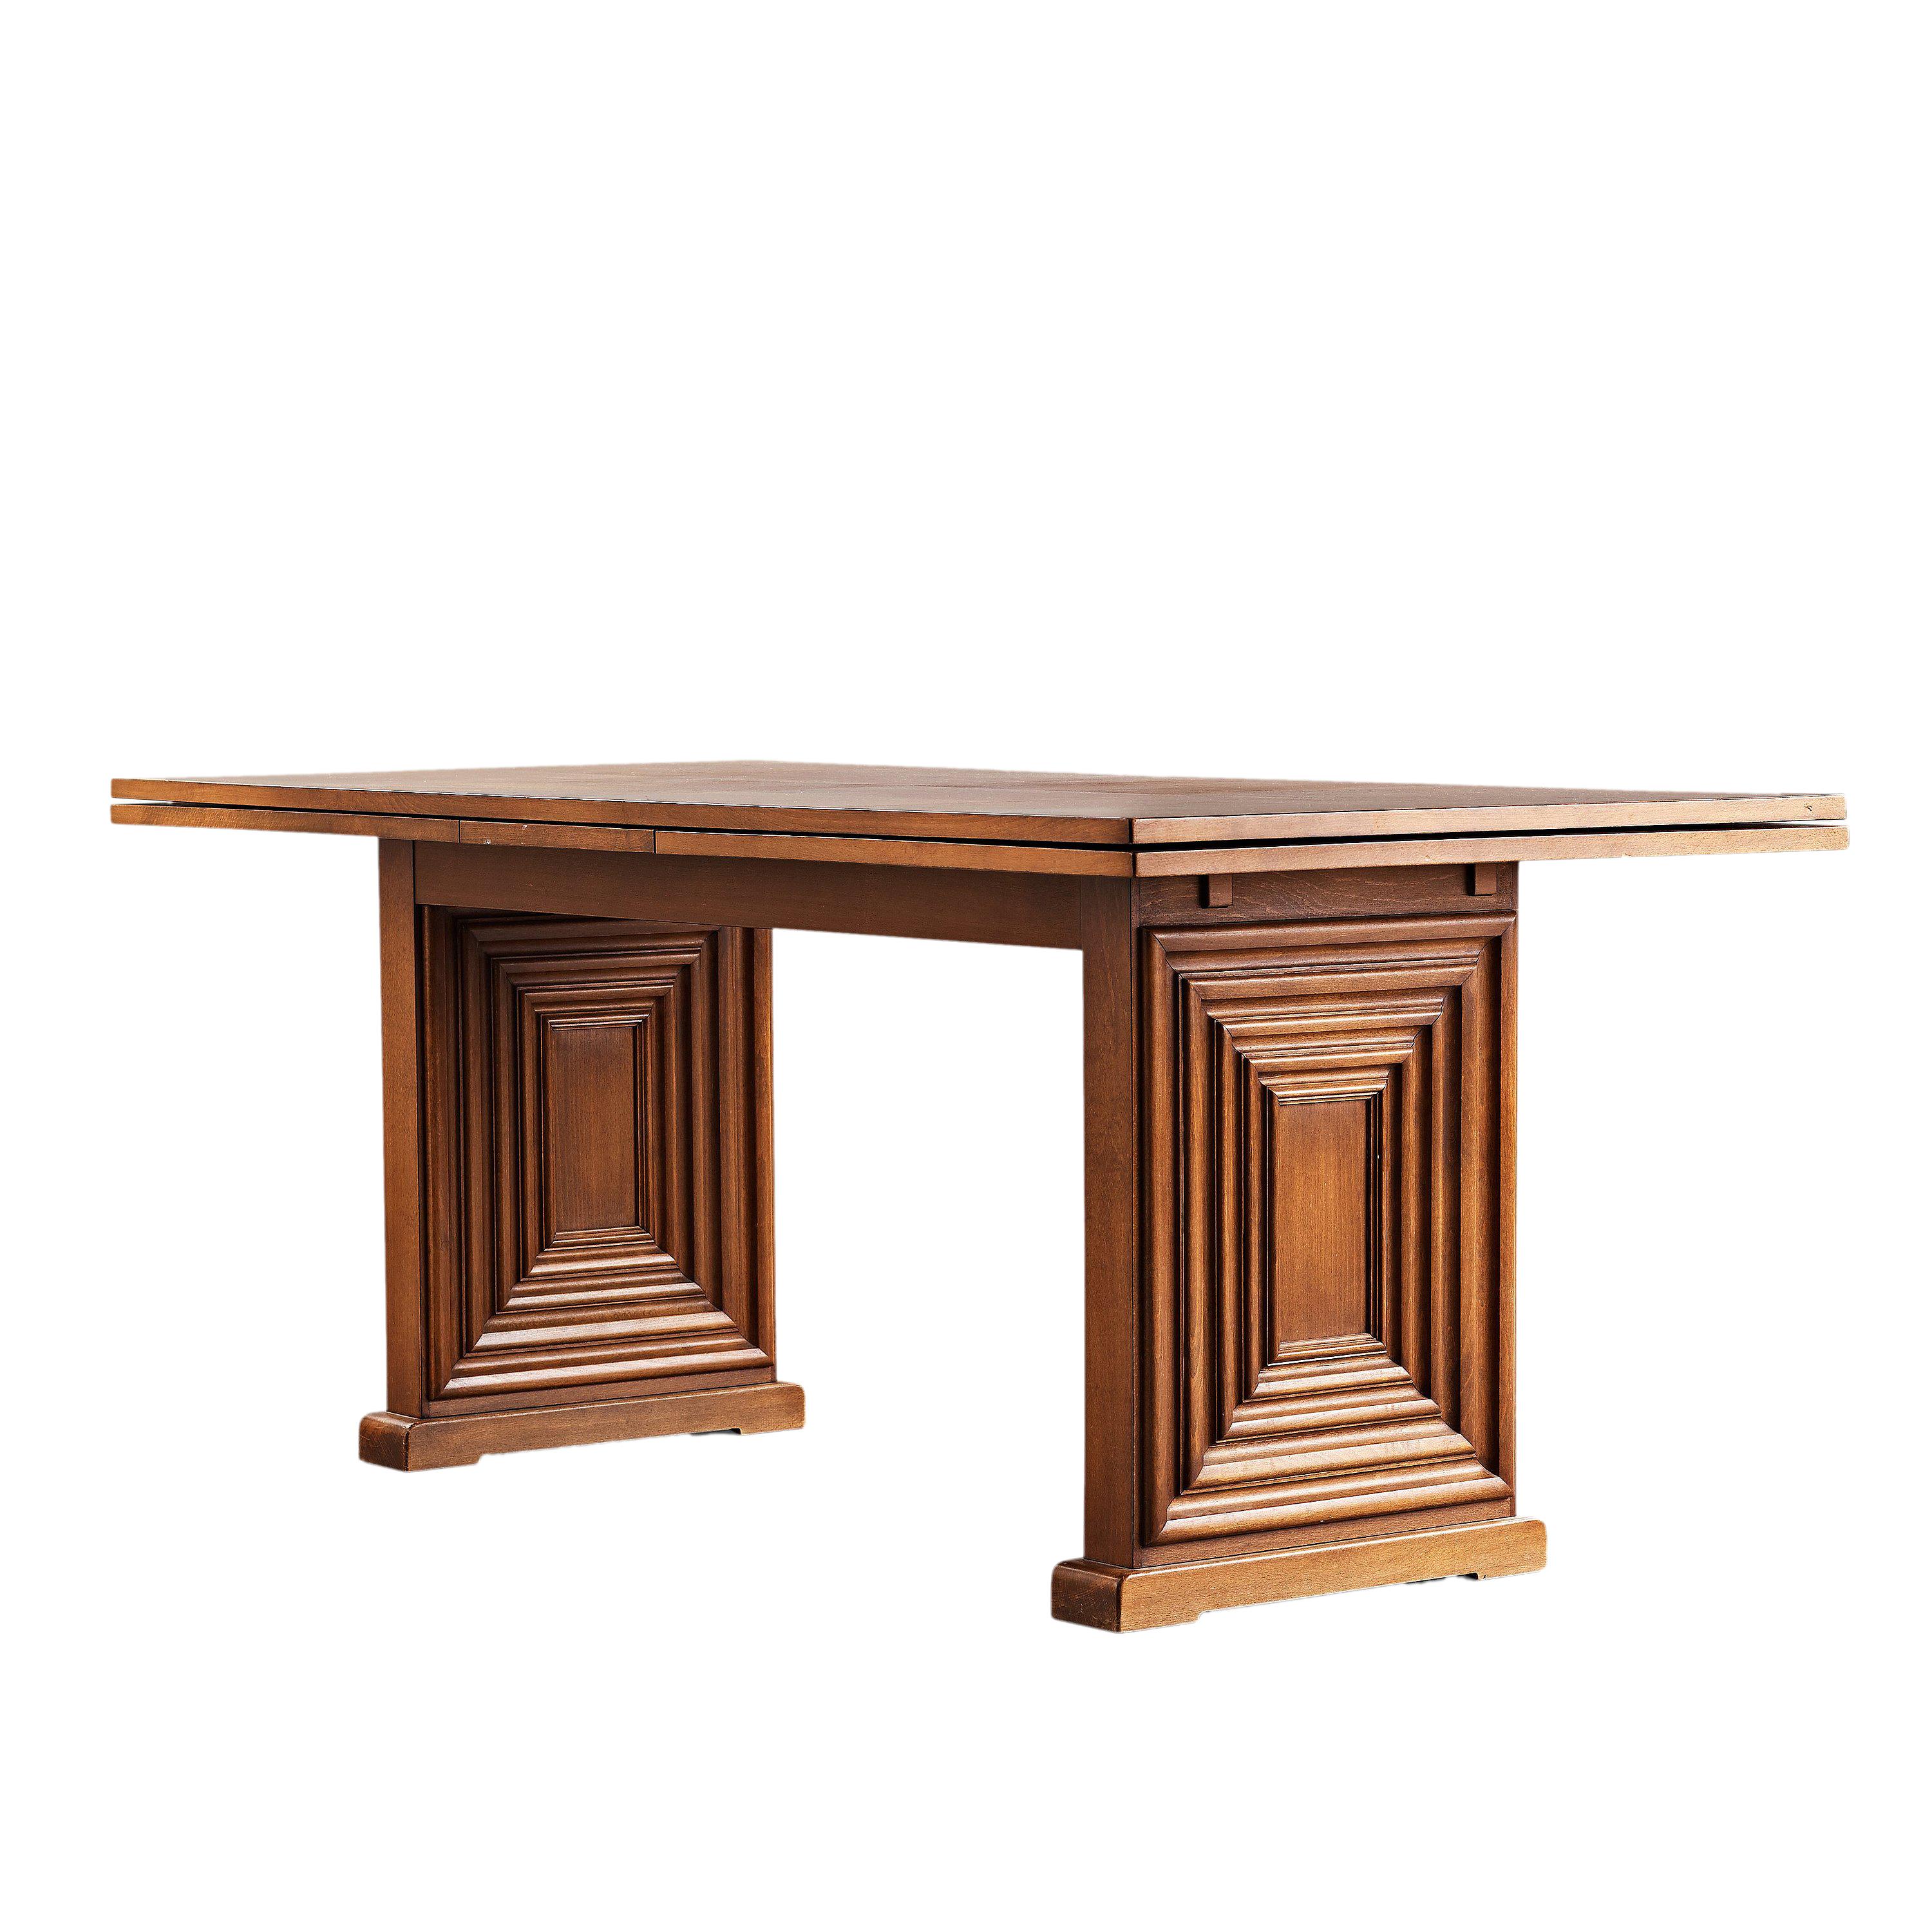 Oscar Nilsson (attributed to) large dining table, executed at Isidor Hörlin AB, Stockholm, 1940s. The base with geometrical relief pattern in stained beech and the top in walnut. Comes with two extension leaves.

Length without leaves is 180 cm (70